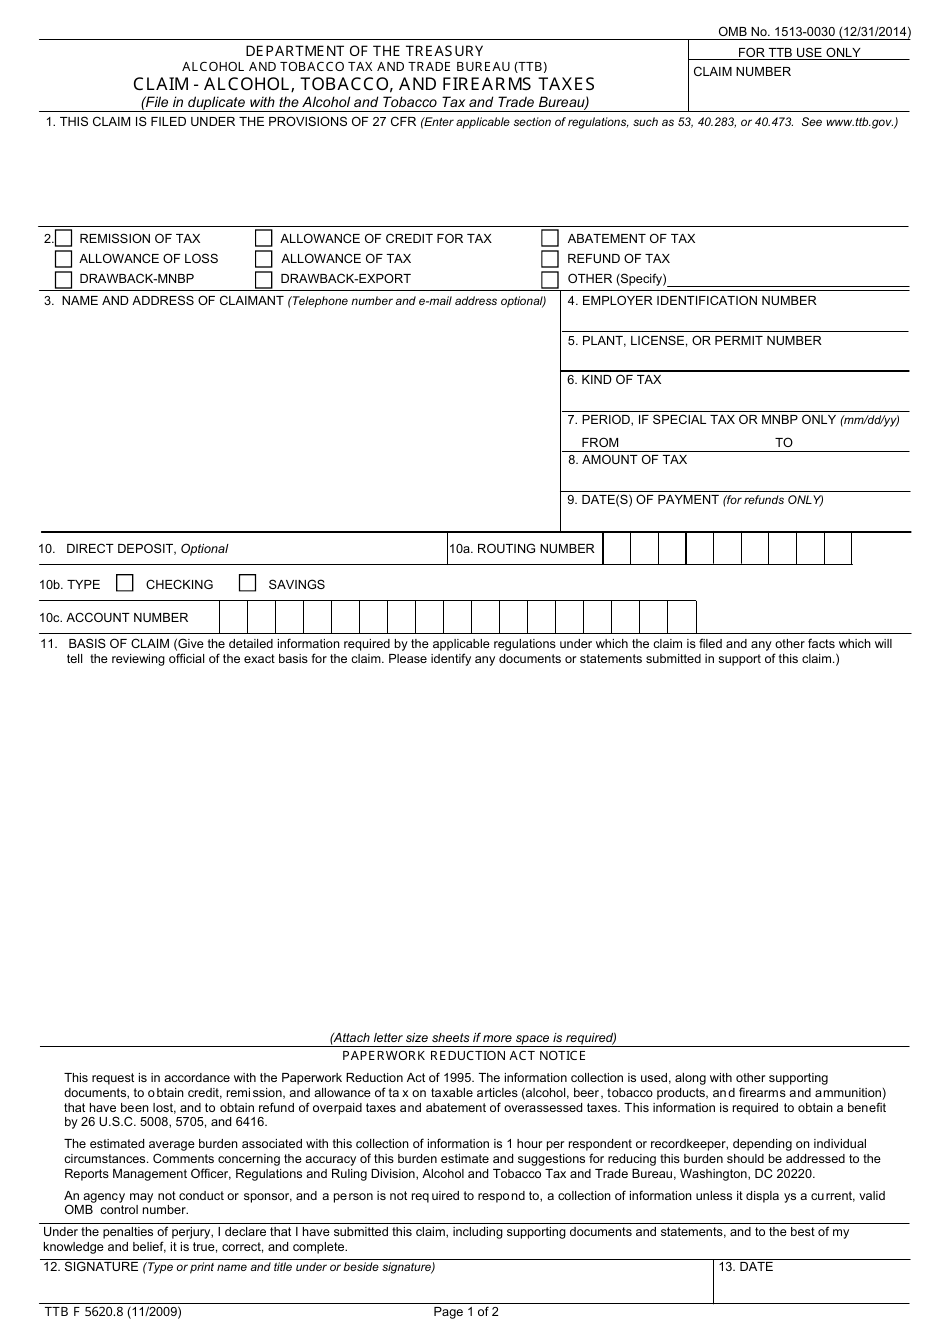 TTB Form 5620.8 Claim - Alcohol, Tobacco, and Firearms Taxes, Page 1